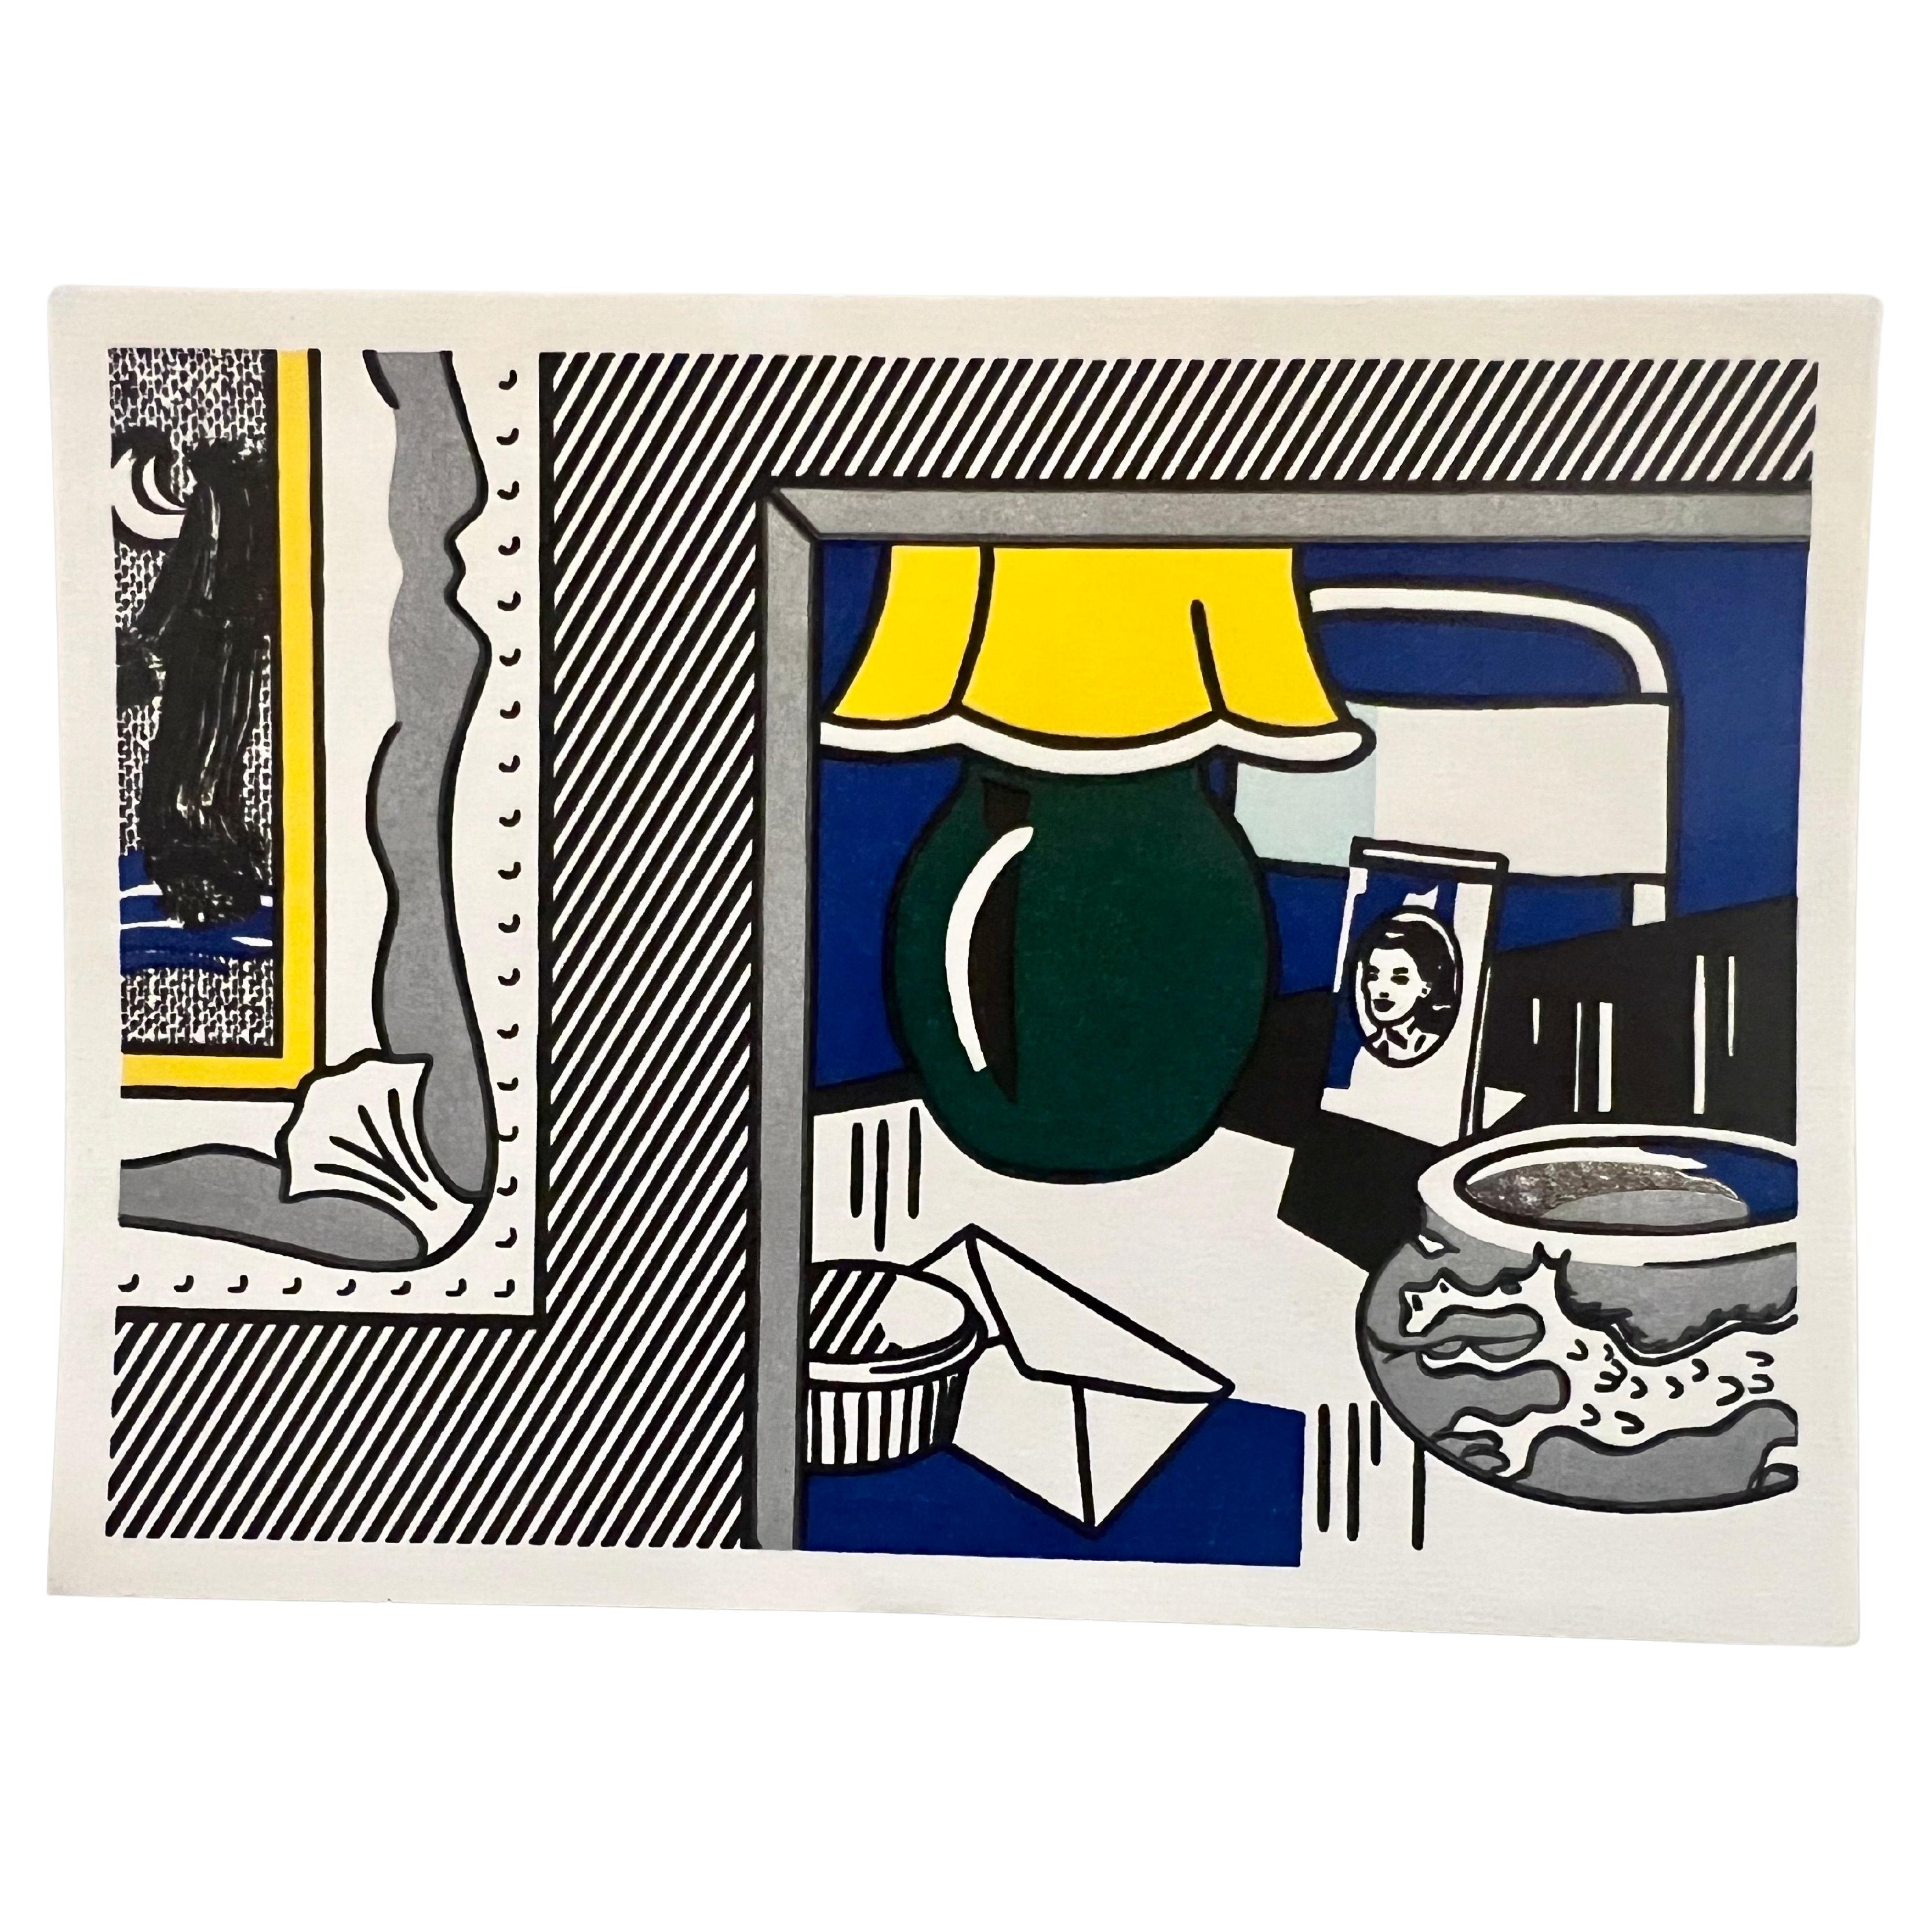 1984 Small Woodcut Lithograph Screenprint & Collage of Roy Litchtenstein Estate